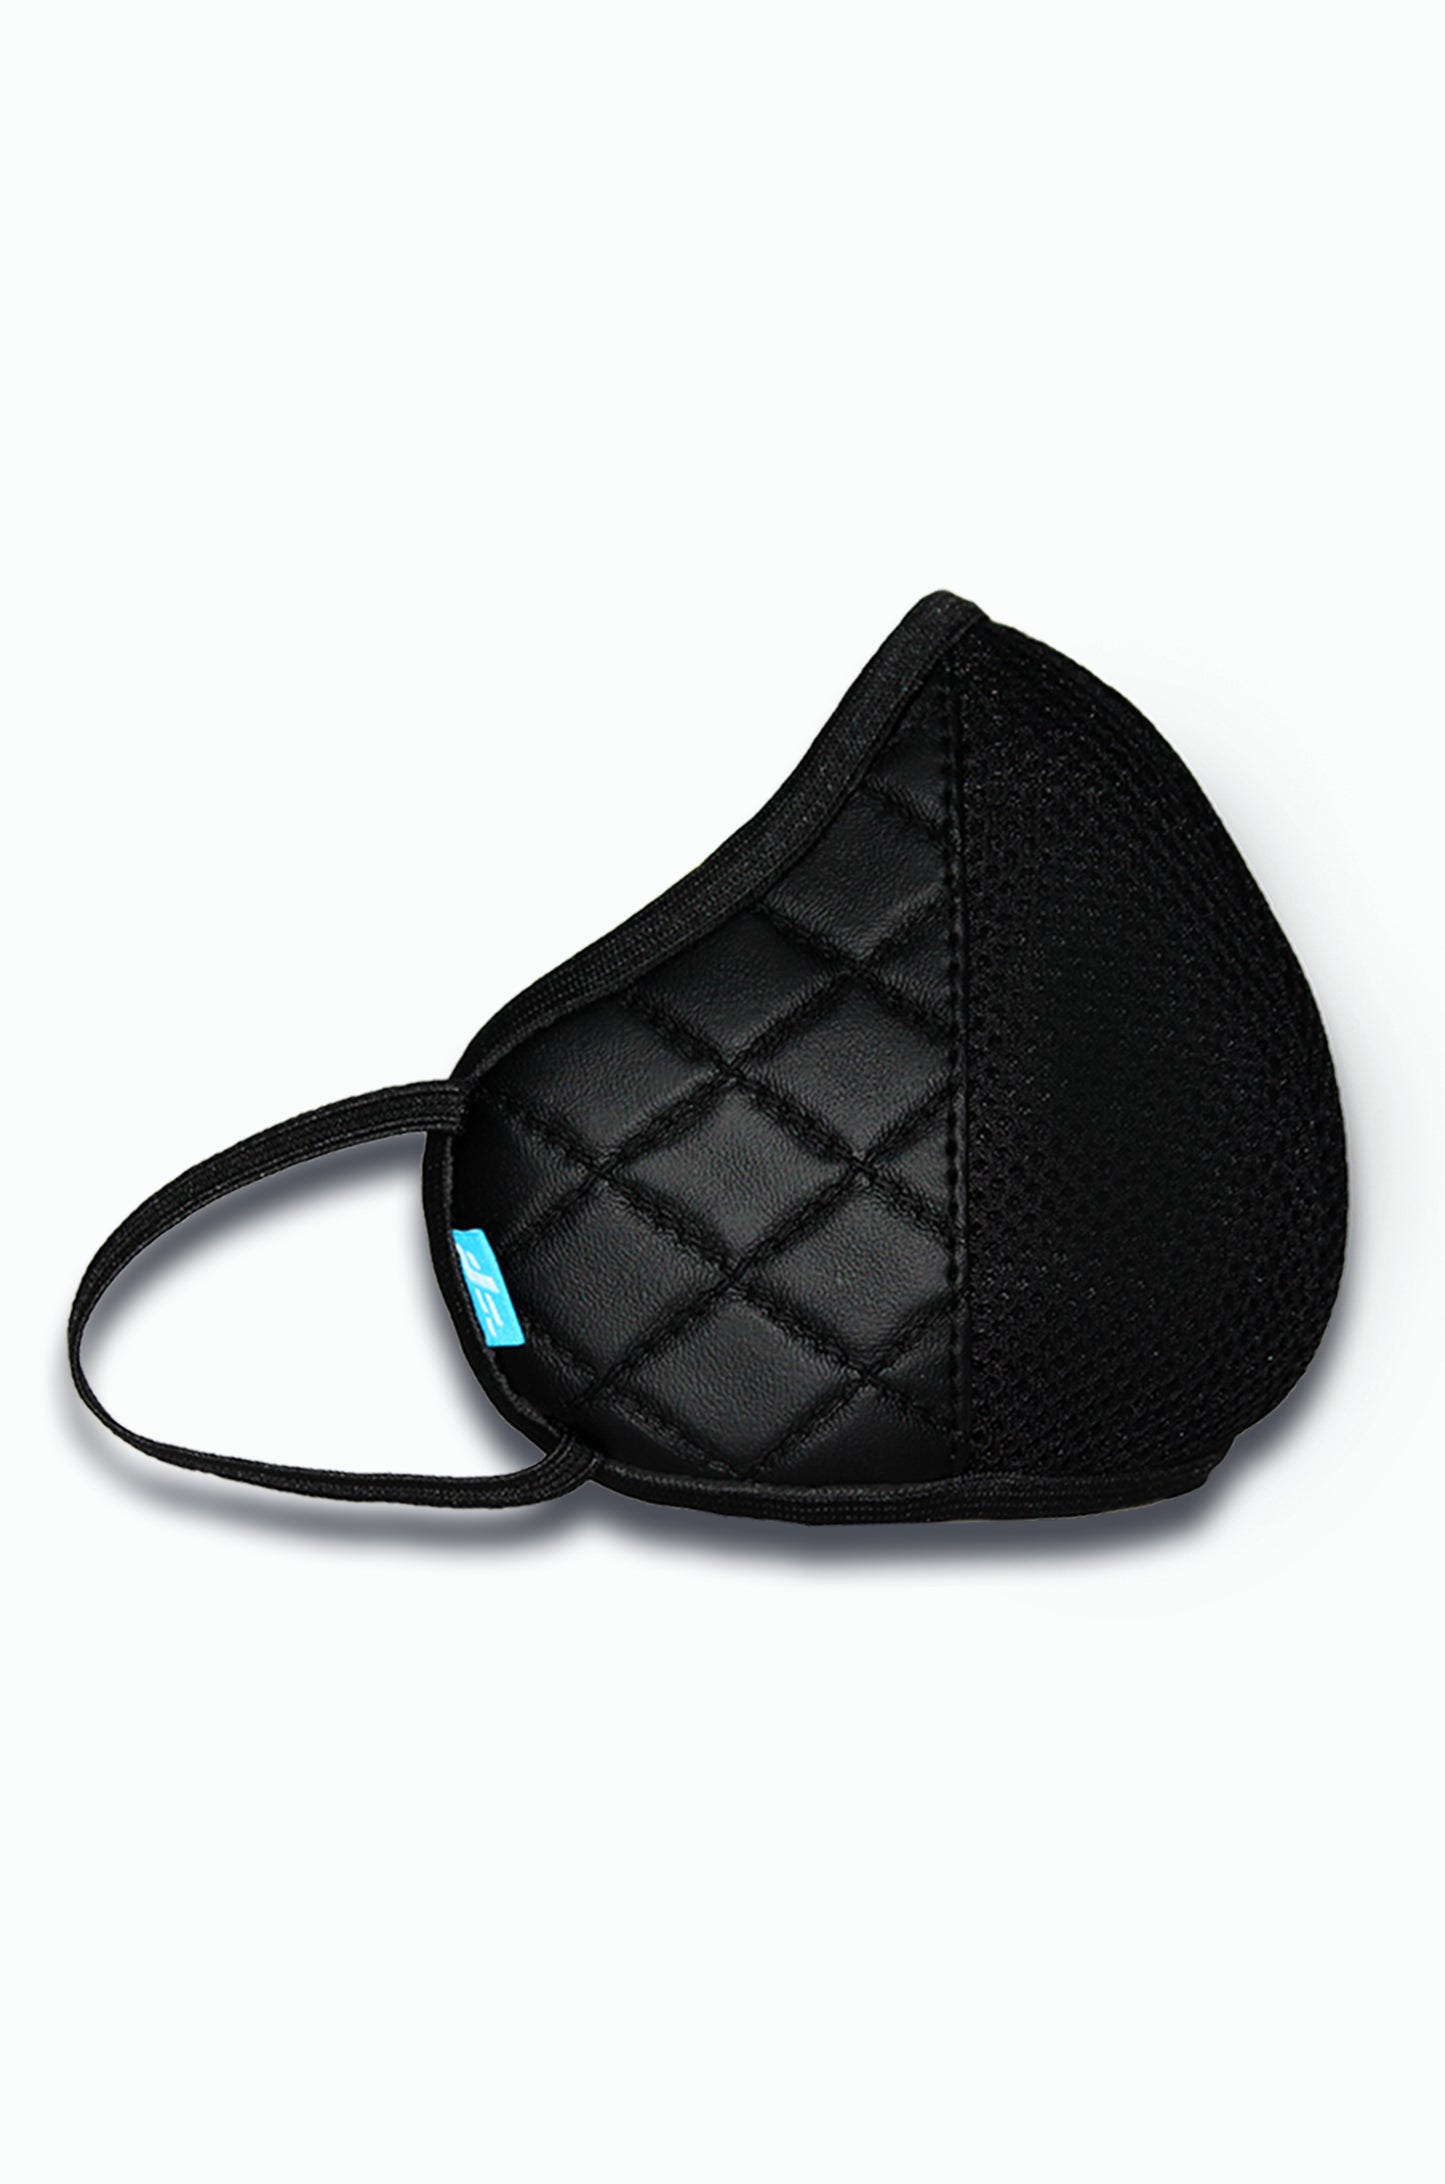 F Gear Luxur F95 Leatherette Mask Diamond Black Safeguard 7 layer ISO CE SITRA lab certified >95% Bacteria Filtration